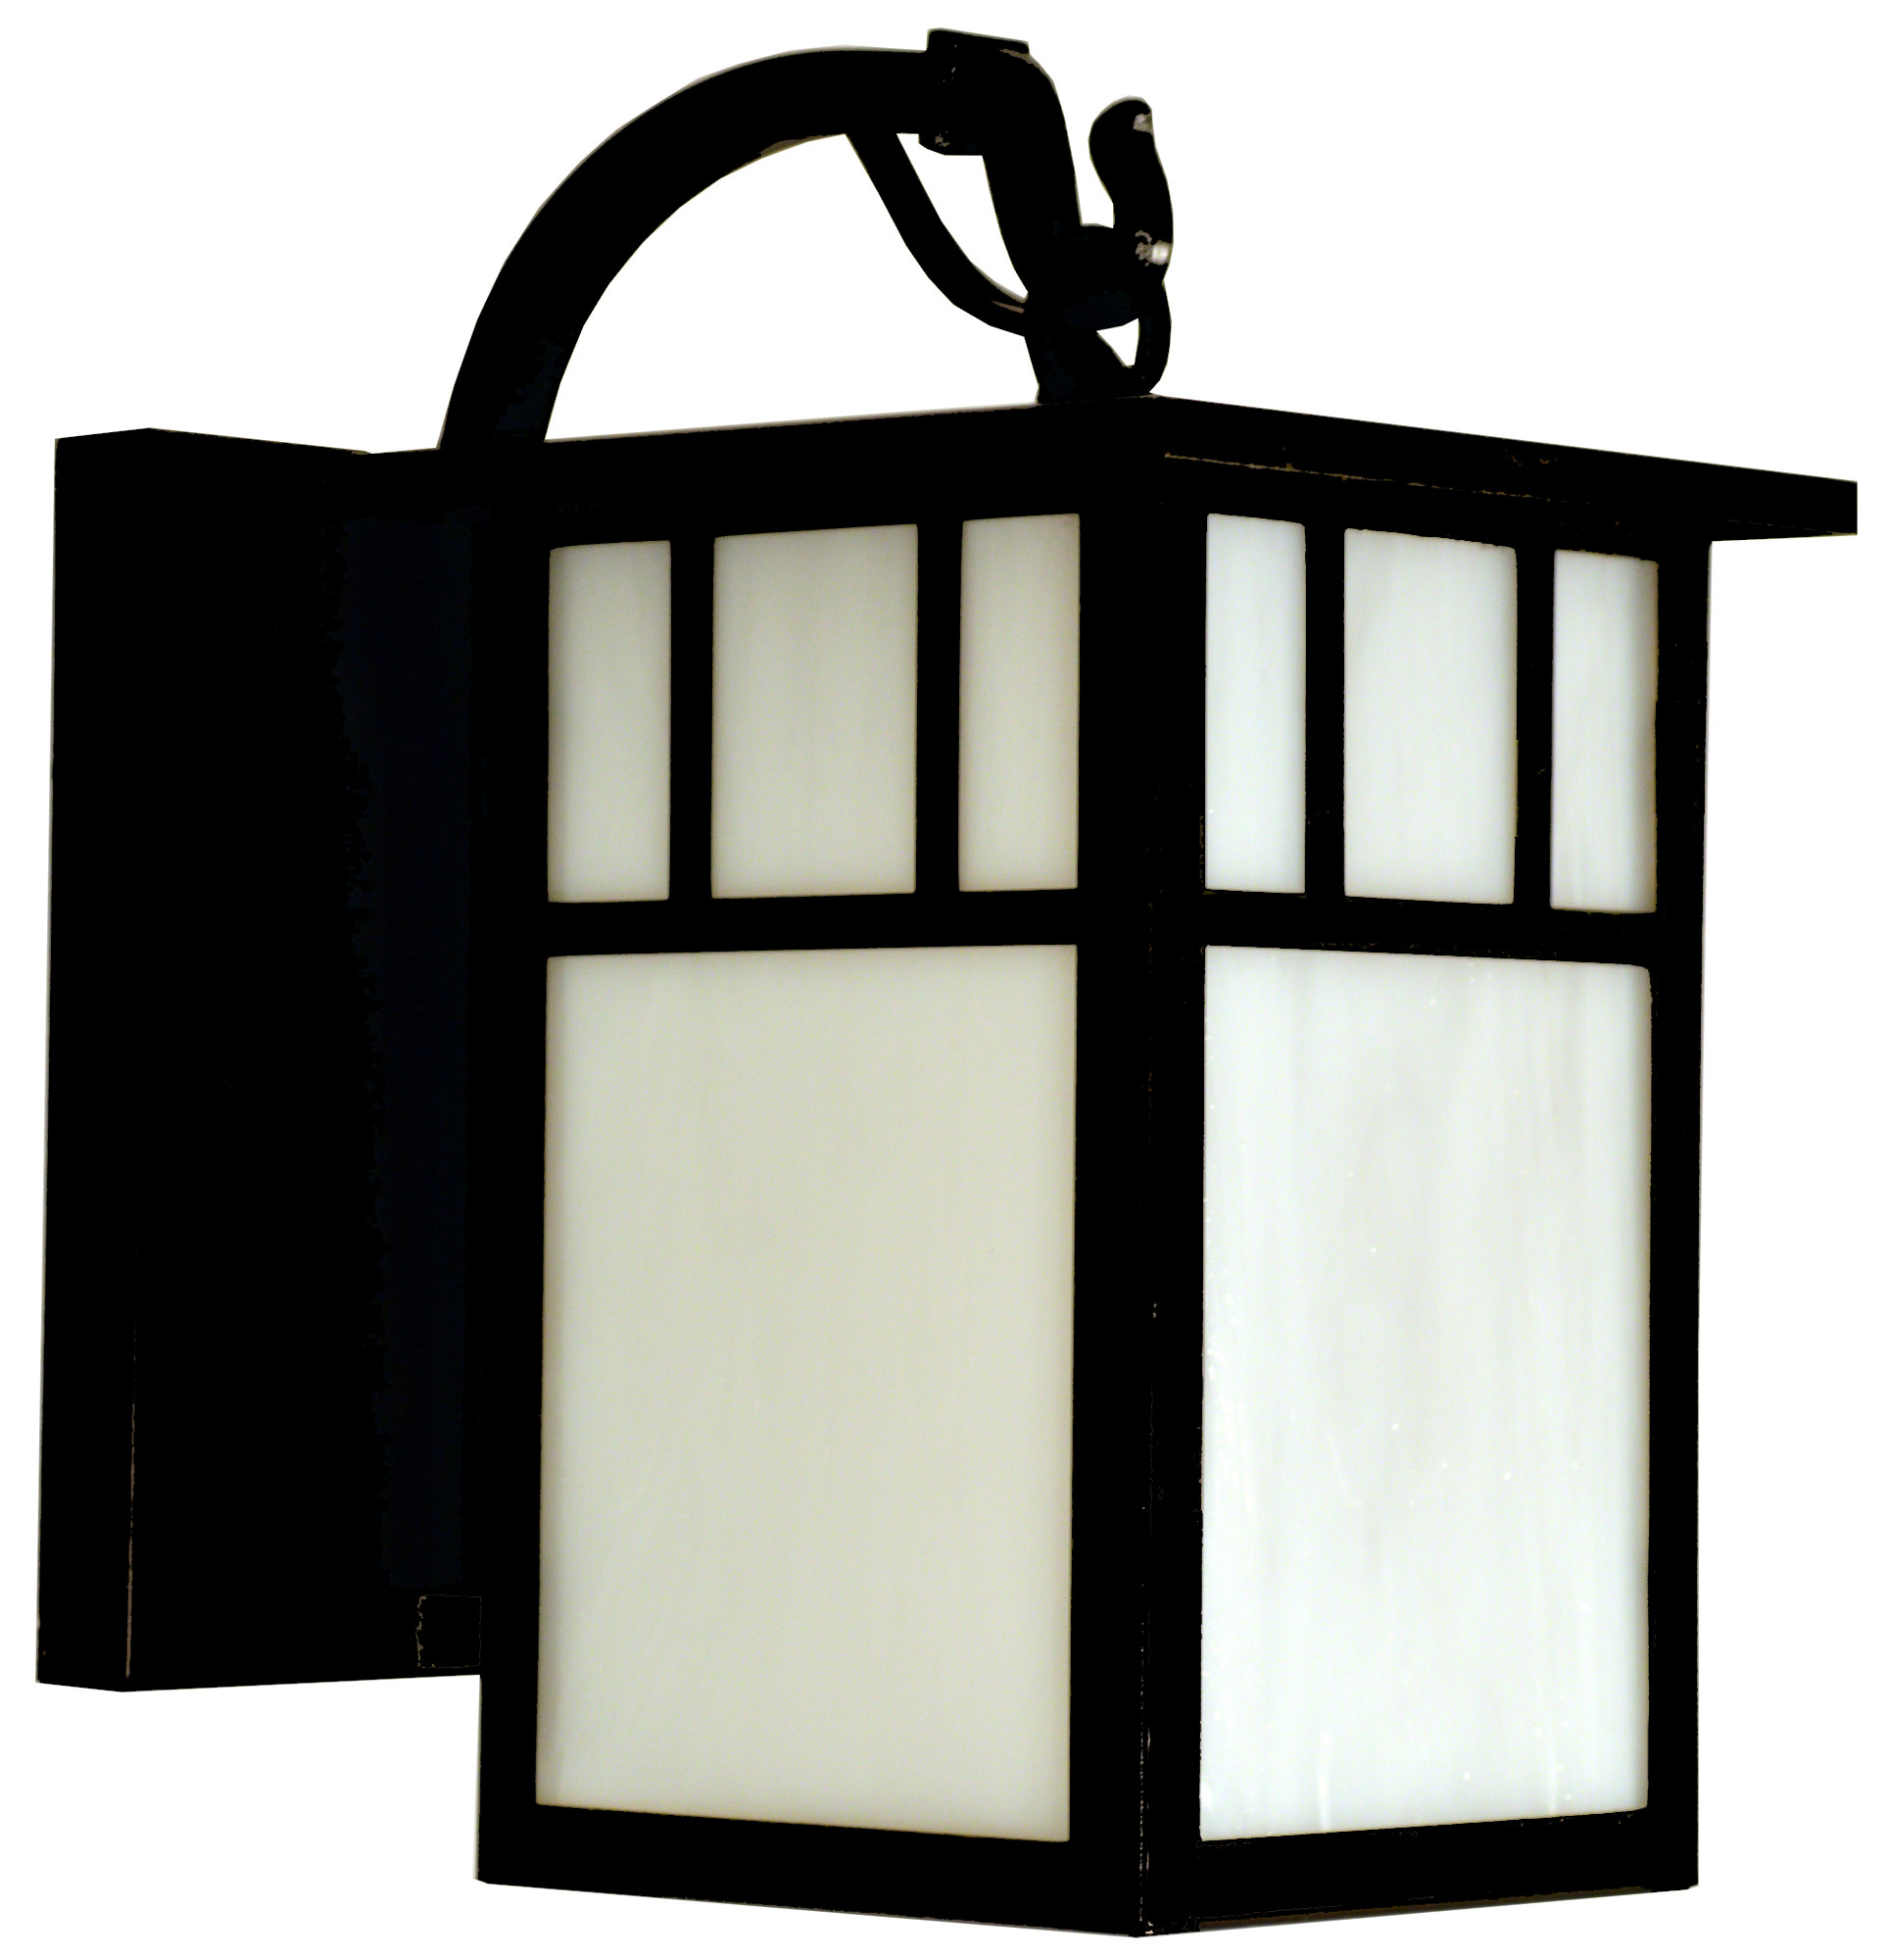 Huntington Hook Outdoor Wall Sconce by Arroyo Craftsman, HB-4LDTCR-AC